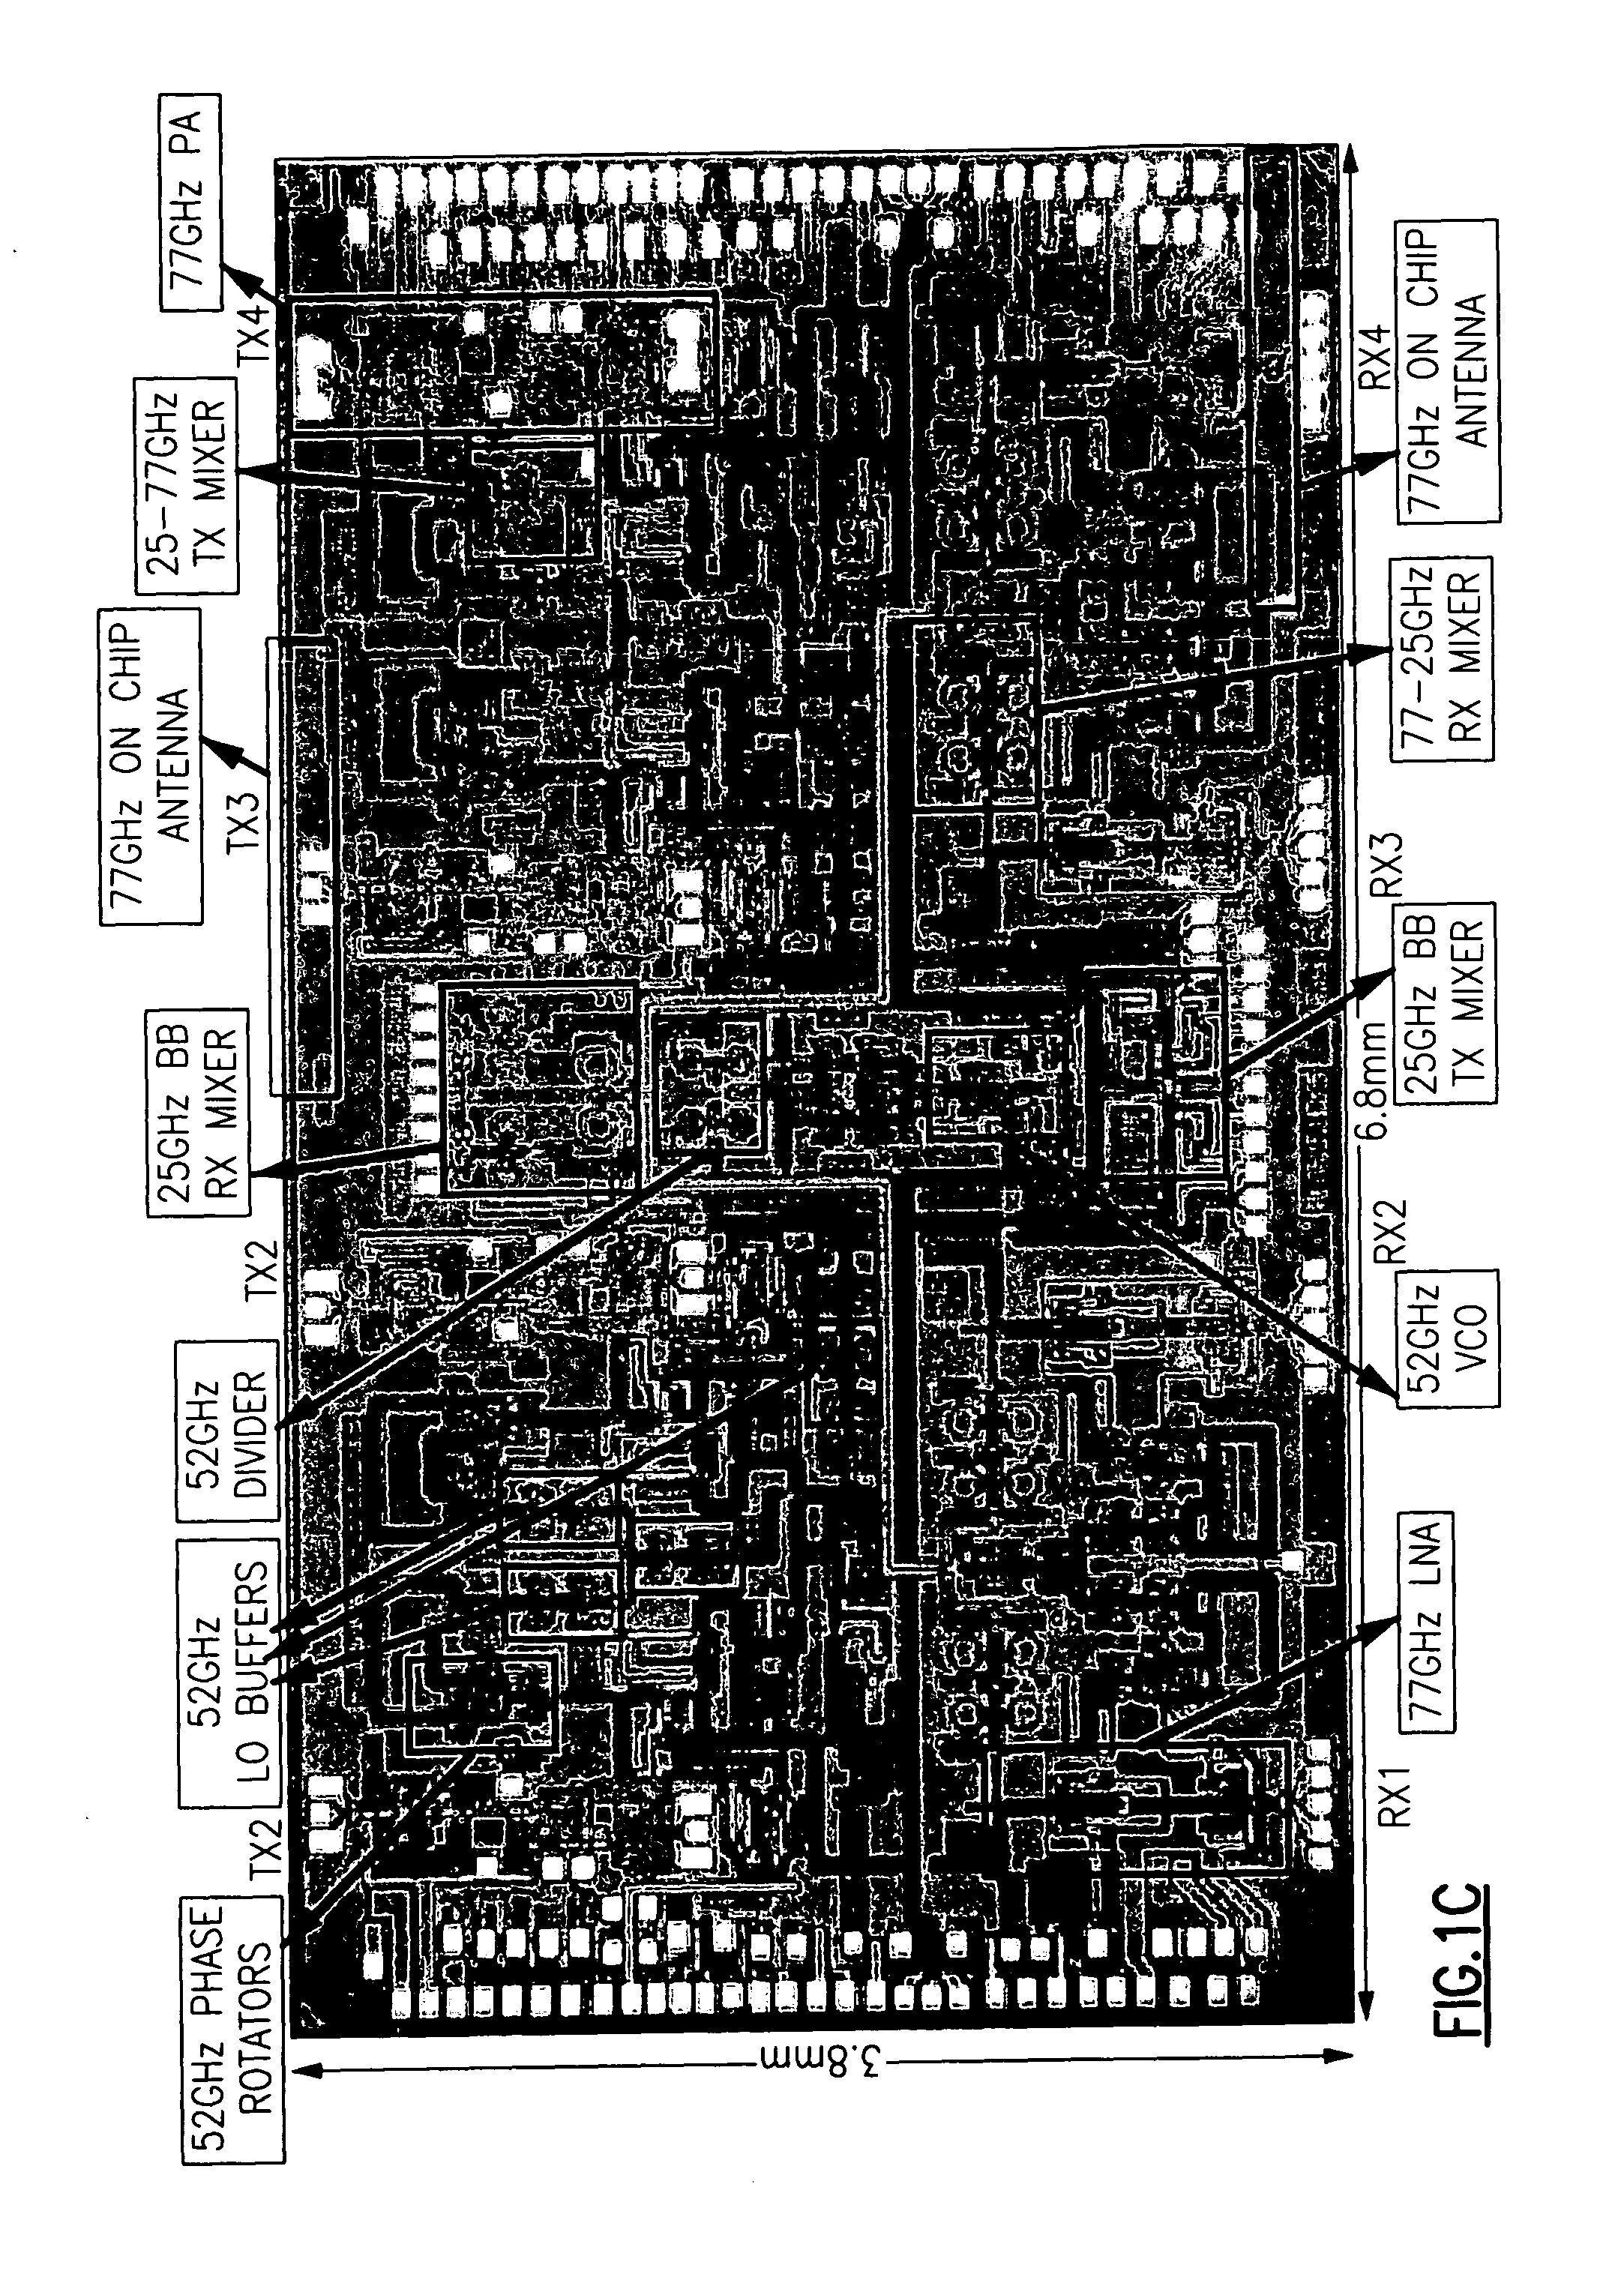 Mm-wave fully integrated phased array receiver and transmitter with on-chip antennas